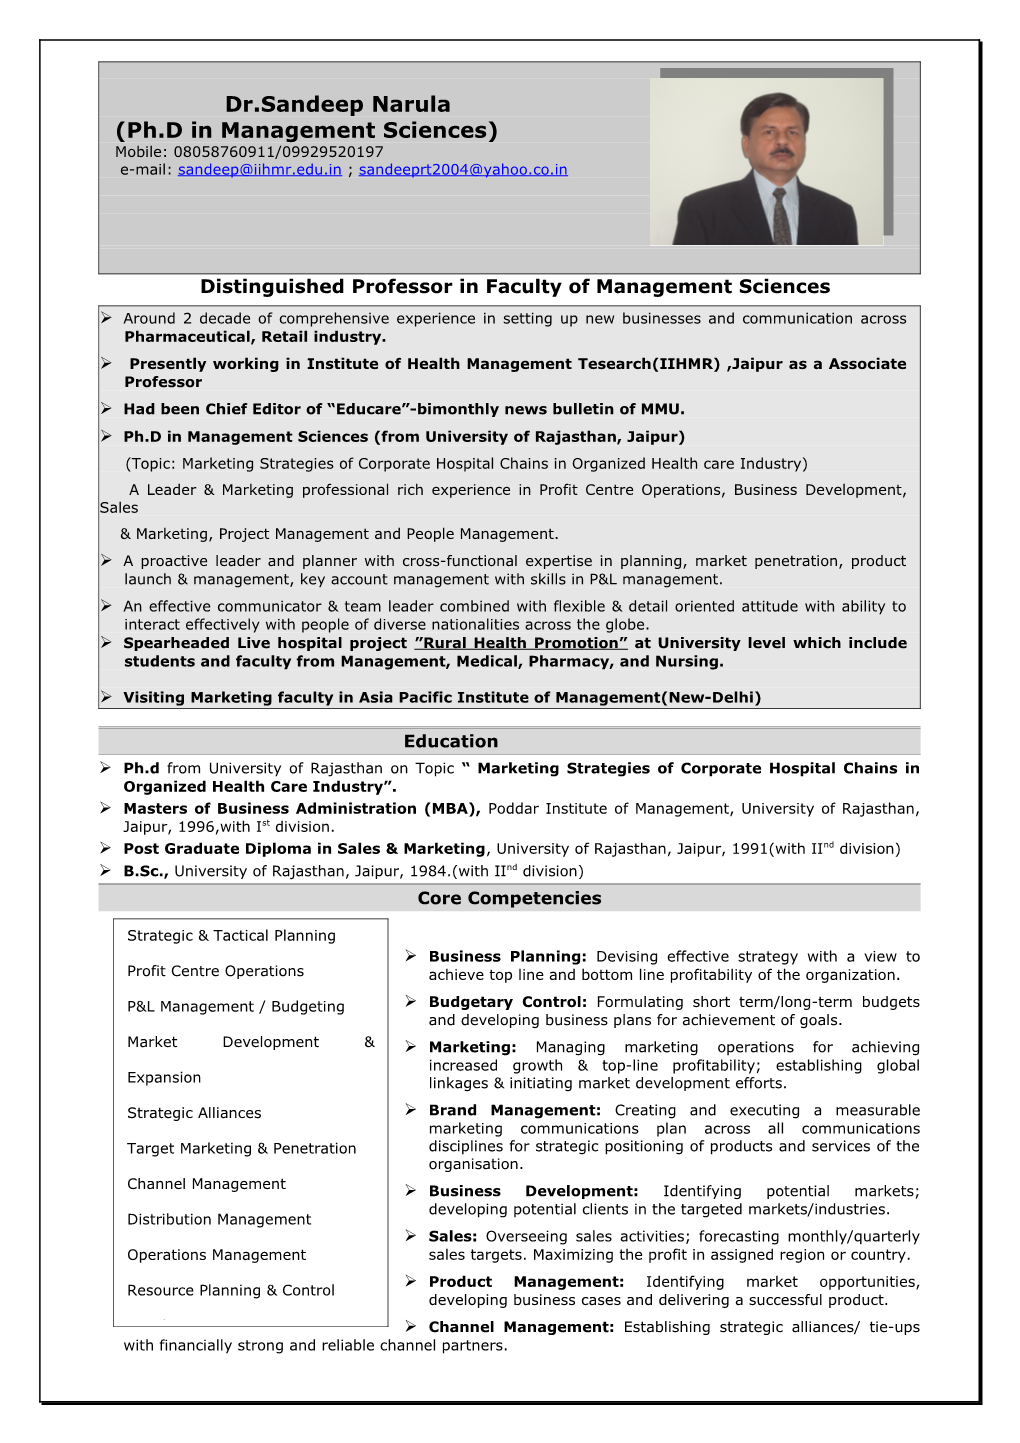 Distinguishedprofessor in Faculty of Management Sciences